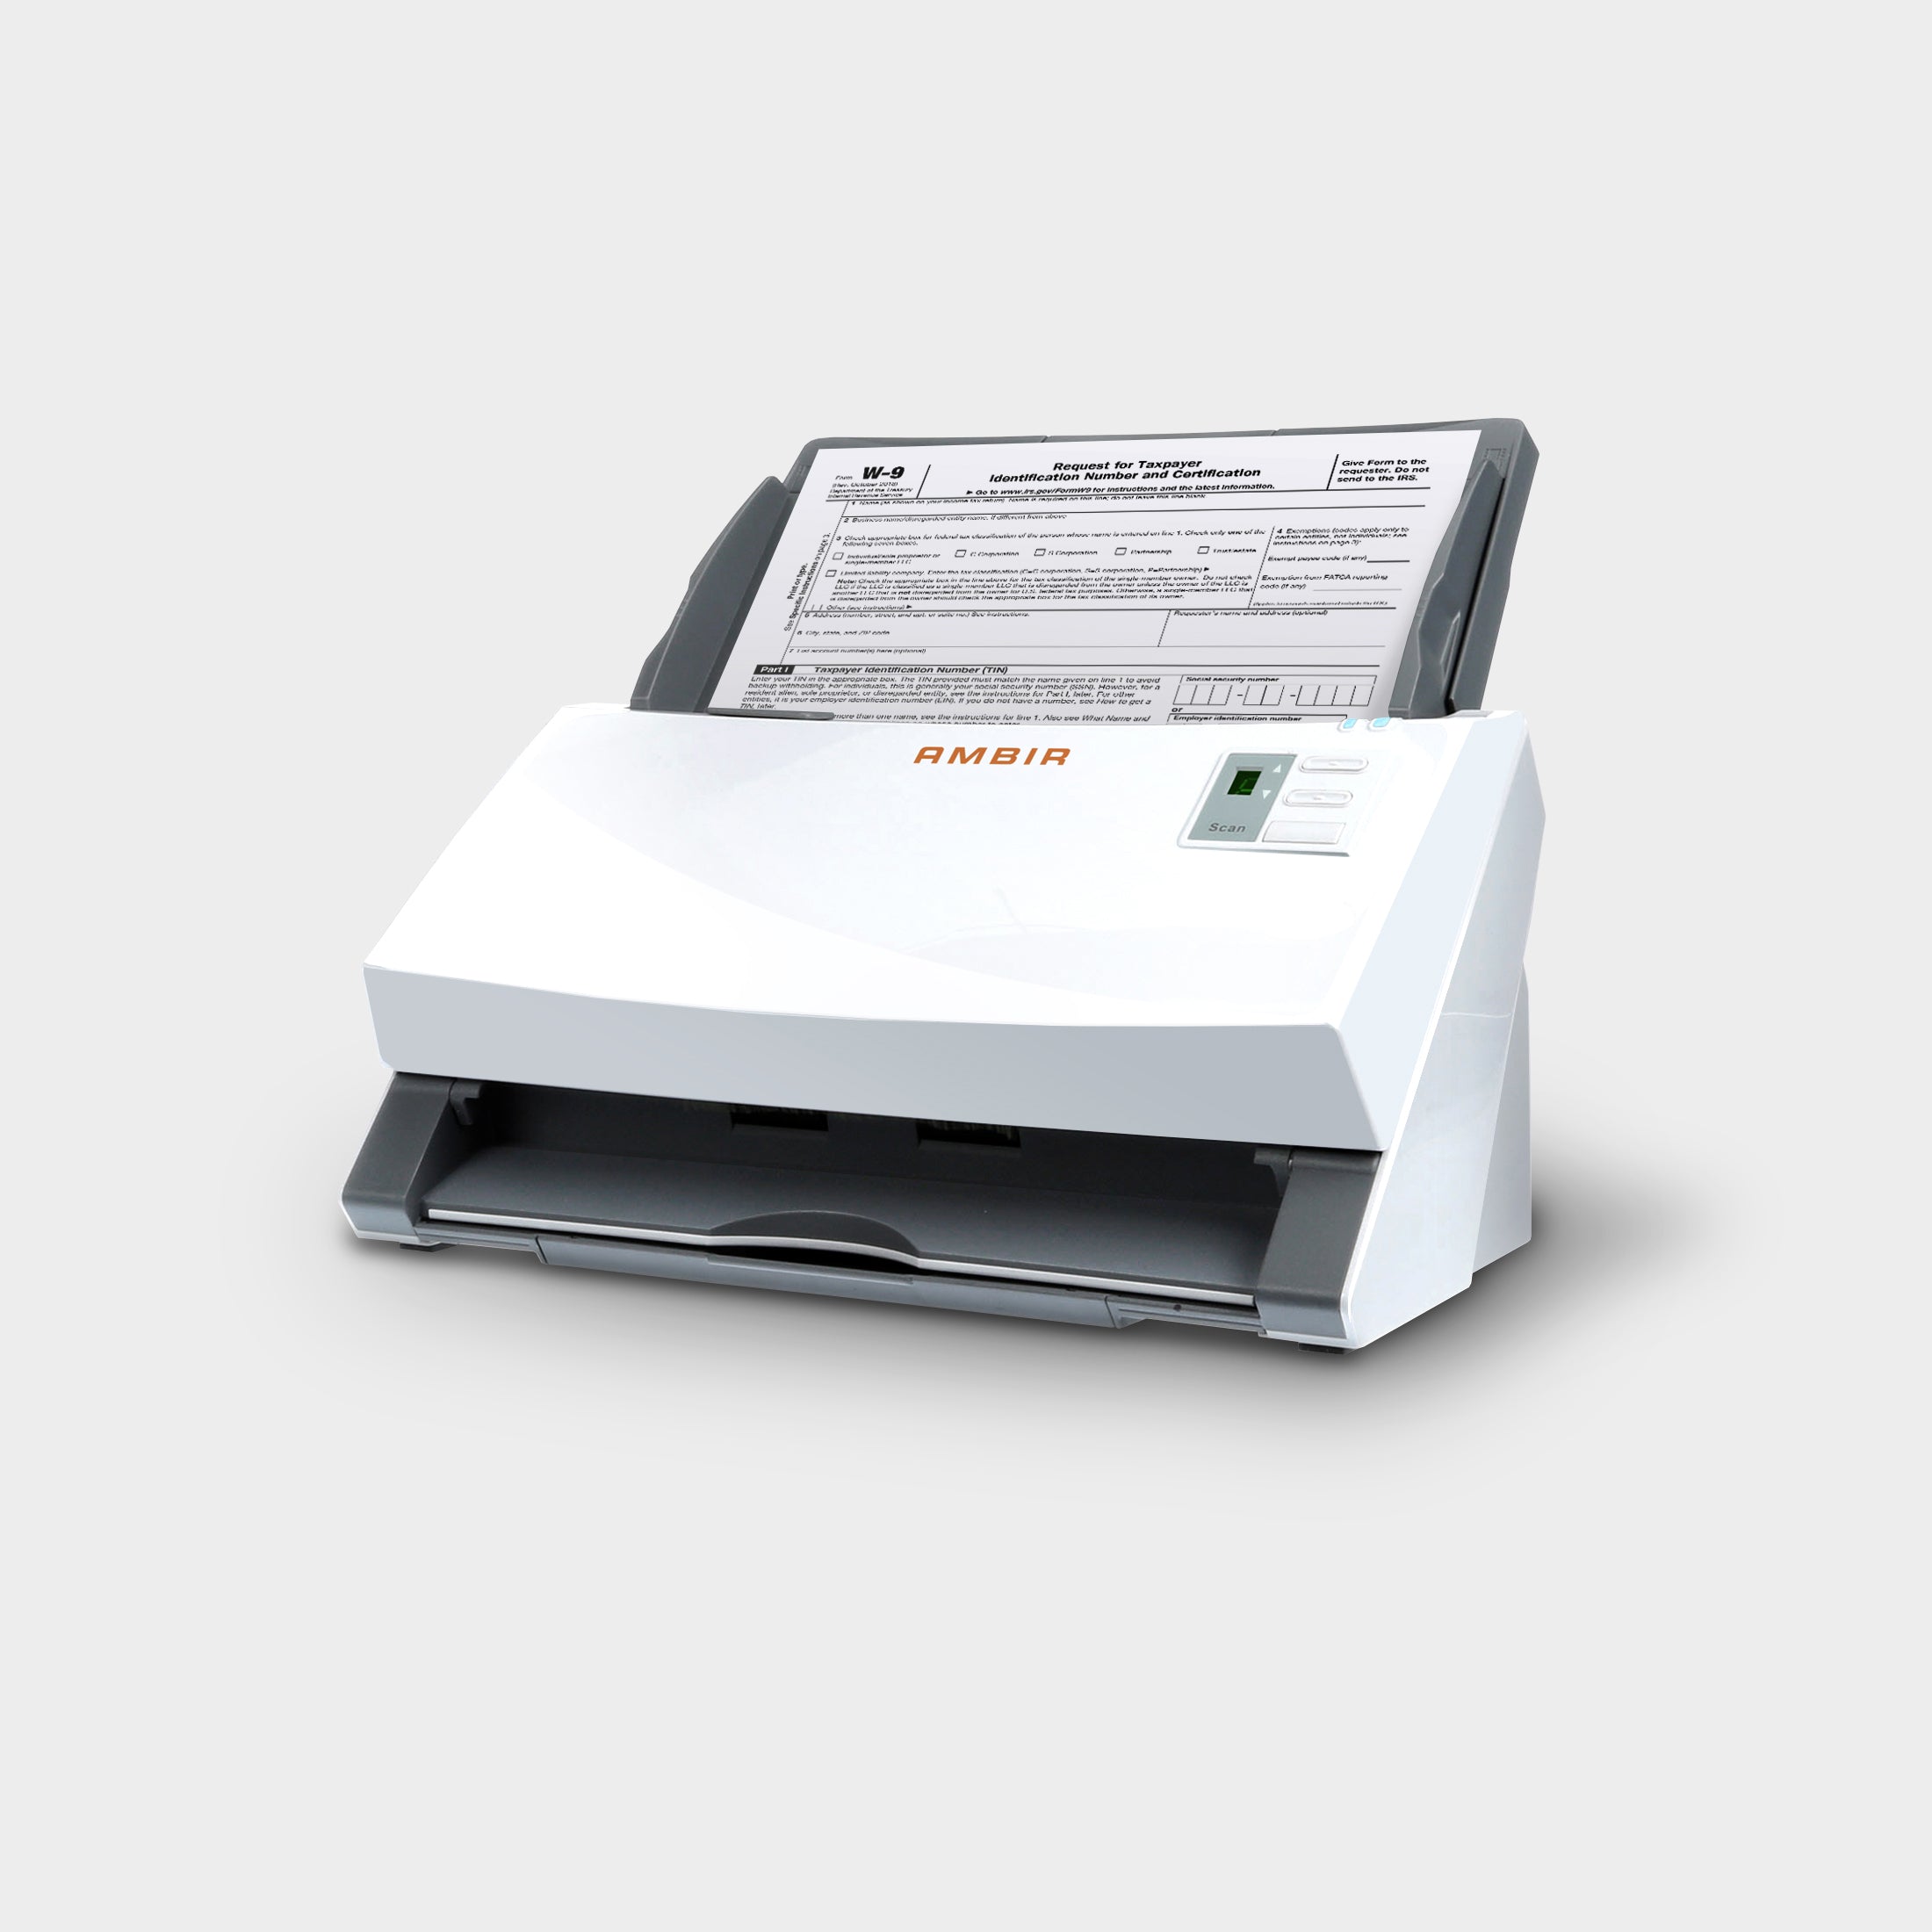 ImageScan Pro 340u ADF Scanner for athenahealth users (DS340-ATH)